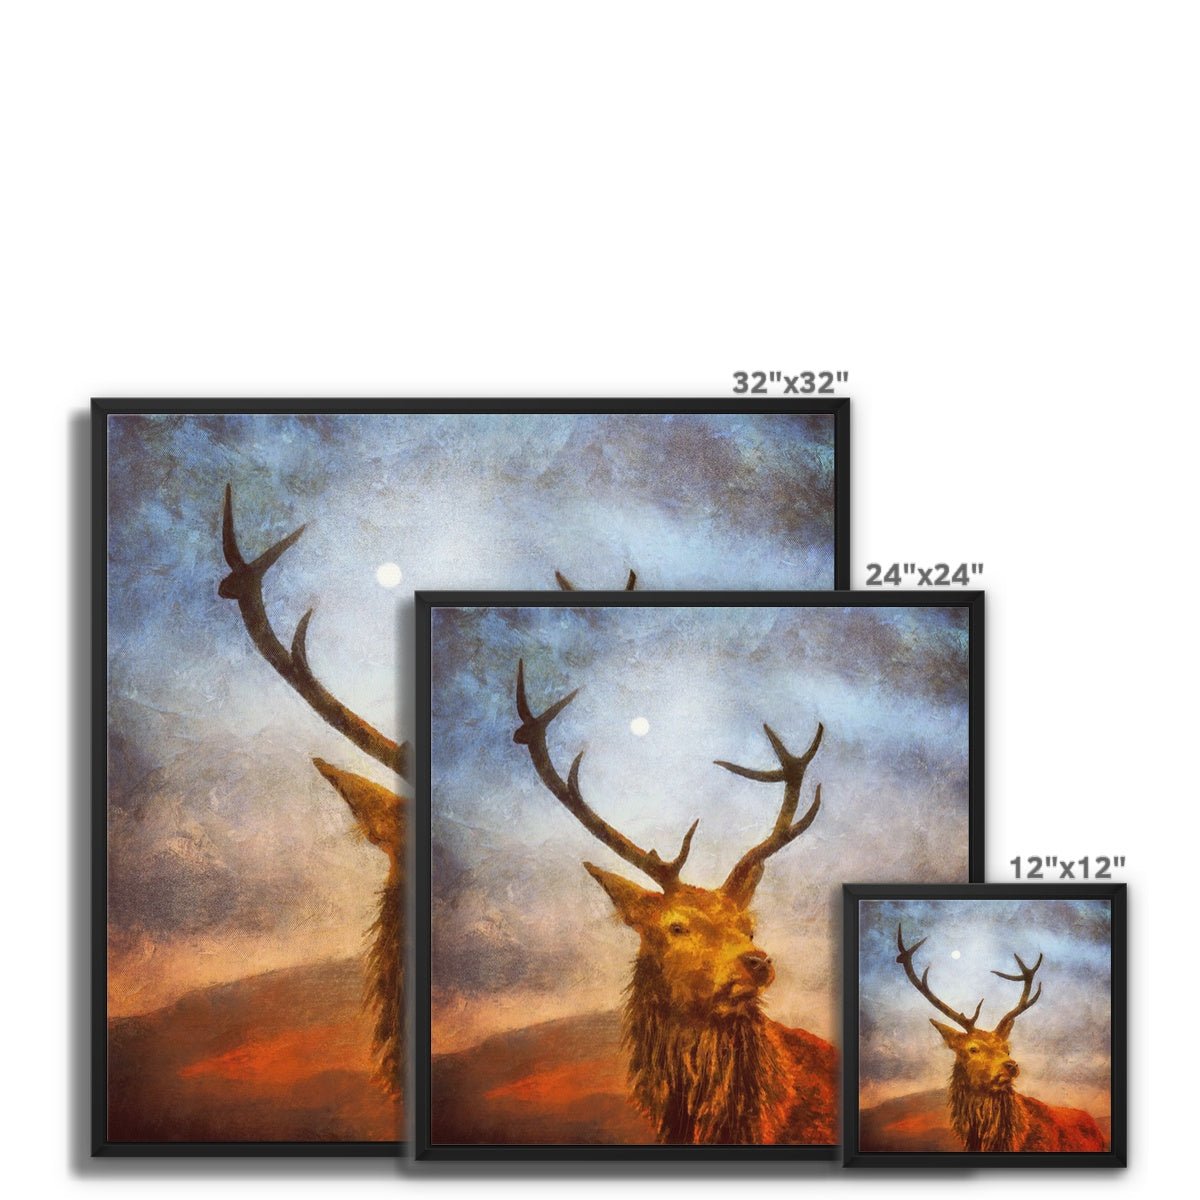 A Moonlit Highland Stag Painting | Framed Canvas-Floating Framed Canvas Prints-Scottish Highlands & Lowlands Art Gallery-Paintings, Prints, Homeware, Art Gifts From Scotland By Scottish Artist Kevin Hunter